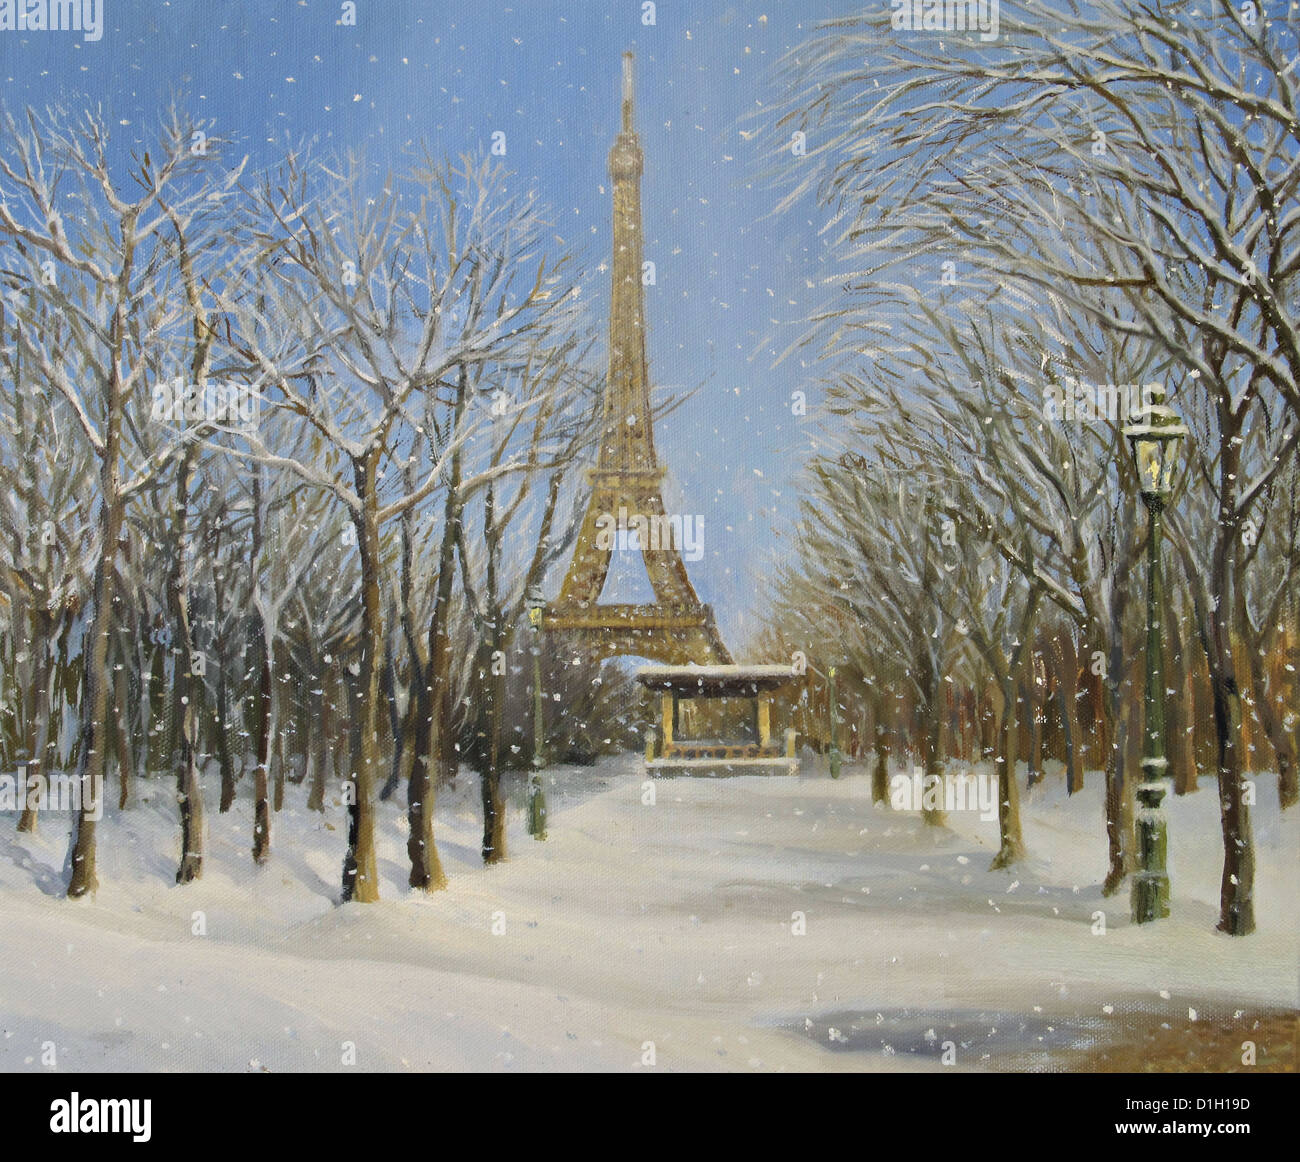 An oil painting on canvas of winter snow scene in Paris with the iconic Eiffel tower at the background of the landscape. Stock Photo